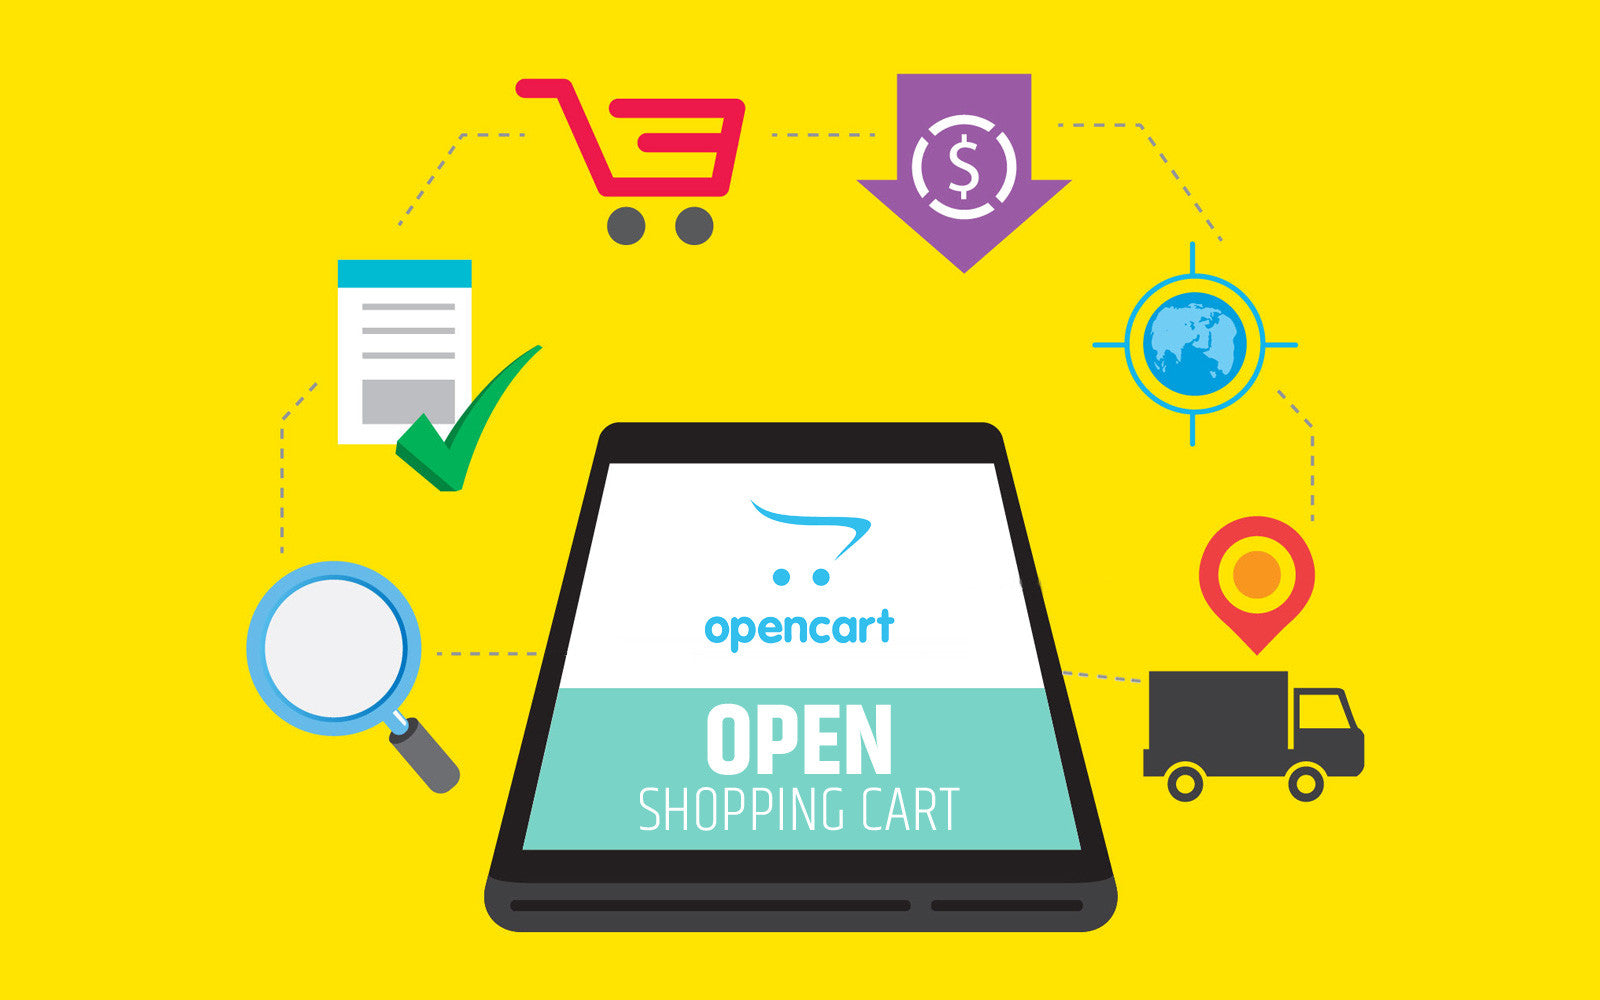 OpenCart Is a Solid Open Shopping Cart Option for New Online Businesses